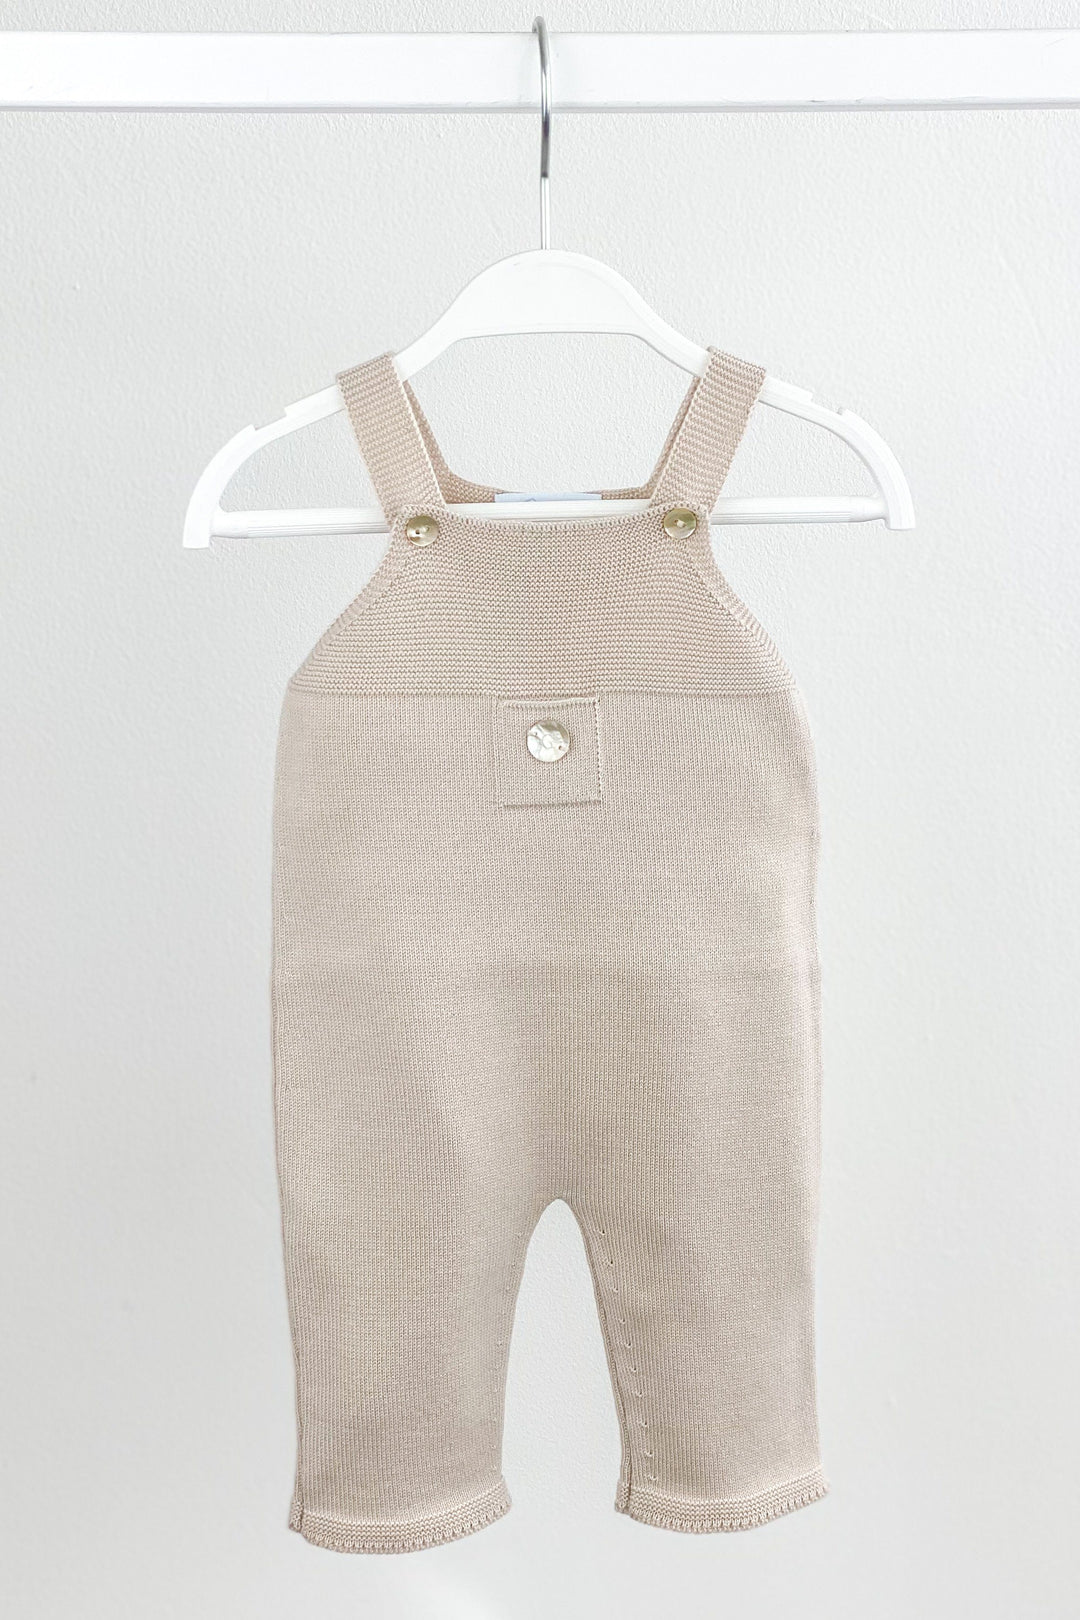 Granlei Classic Knitted Dungarees - Stone | Millie and John